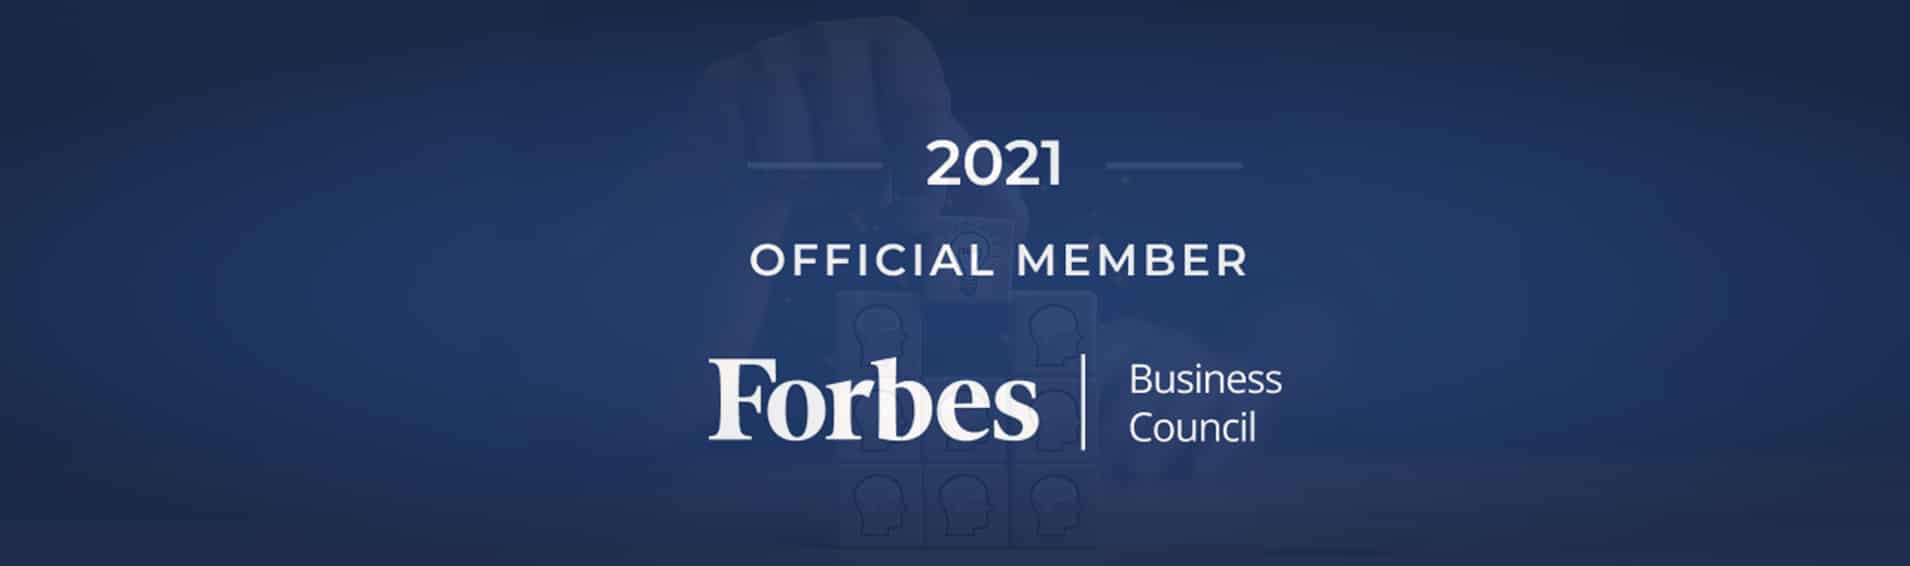 Course5 Intelligence’s SVP of Analytics and Insights, Ajith Sankaran, becomes a Member of the Forbes Business Council